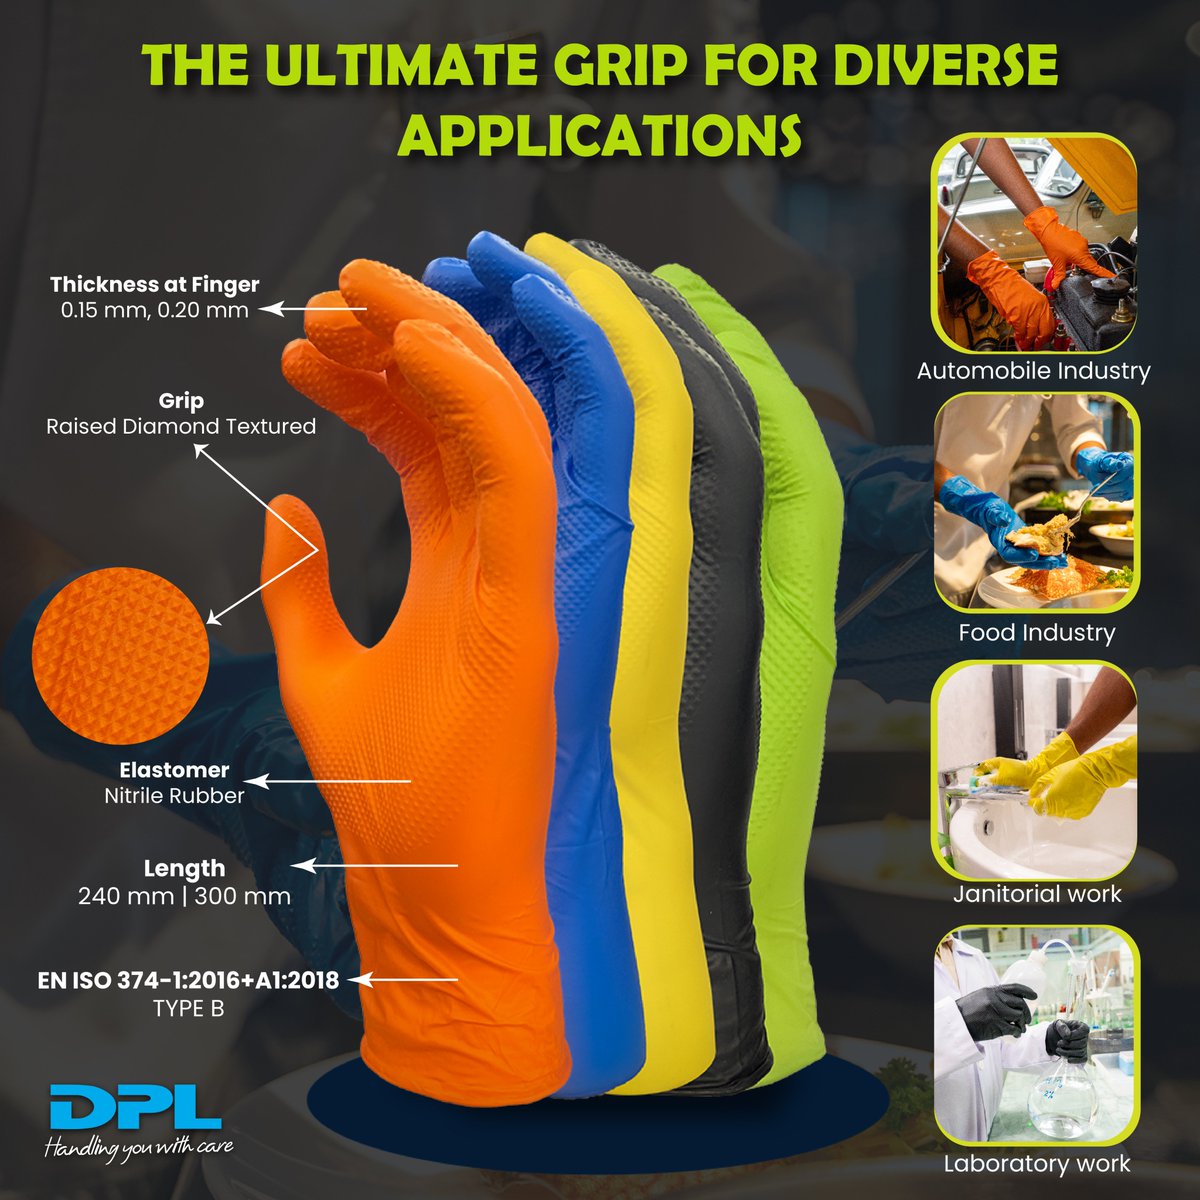 Ready to experience a #DisposableGlove with a #Grip like never before?

#GripperGloves #orangegripperglove #SafetyInnovation #GripConfidence #disposablegripperglove #disposablegloves #gripglove #HandProtection #WorkplaceSafety #SafetyUpgrade #VersatileProtection #safetygloves